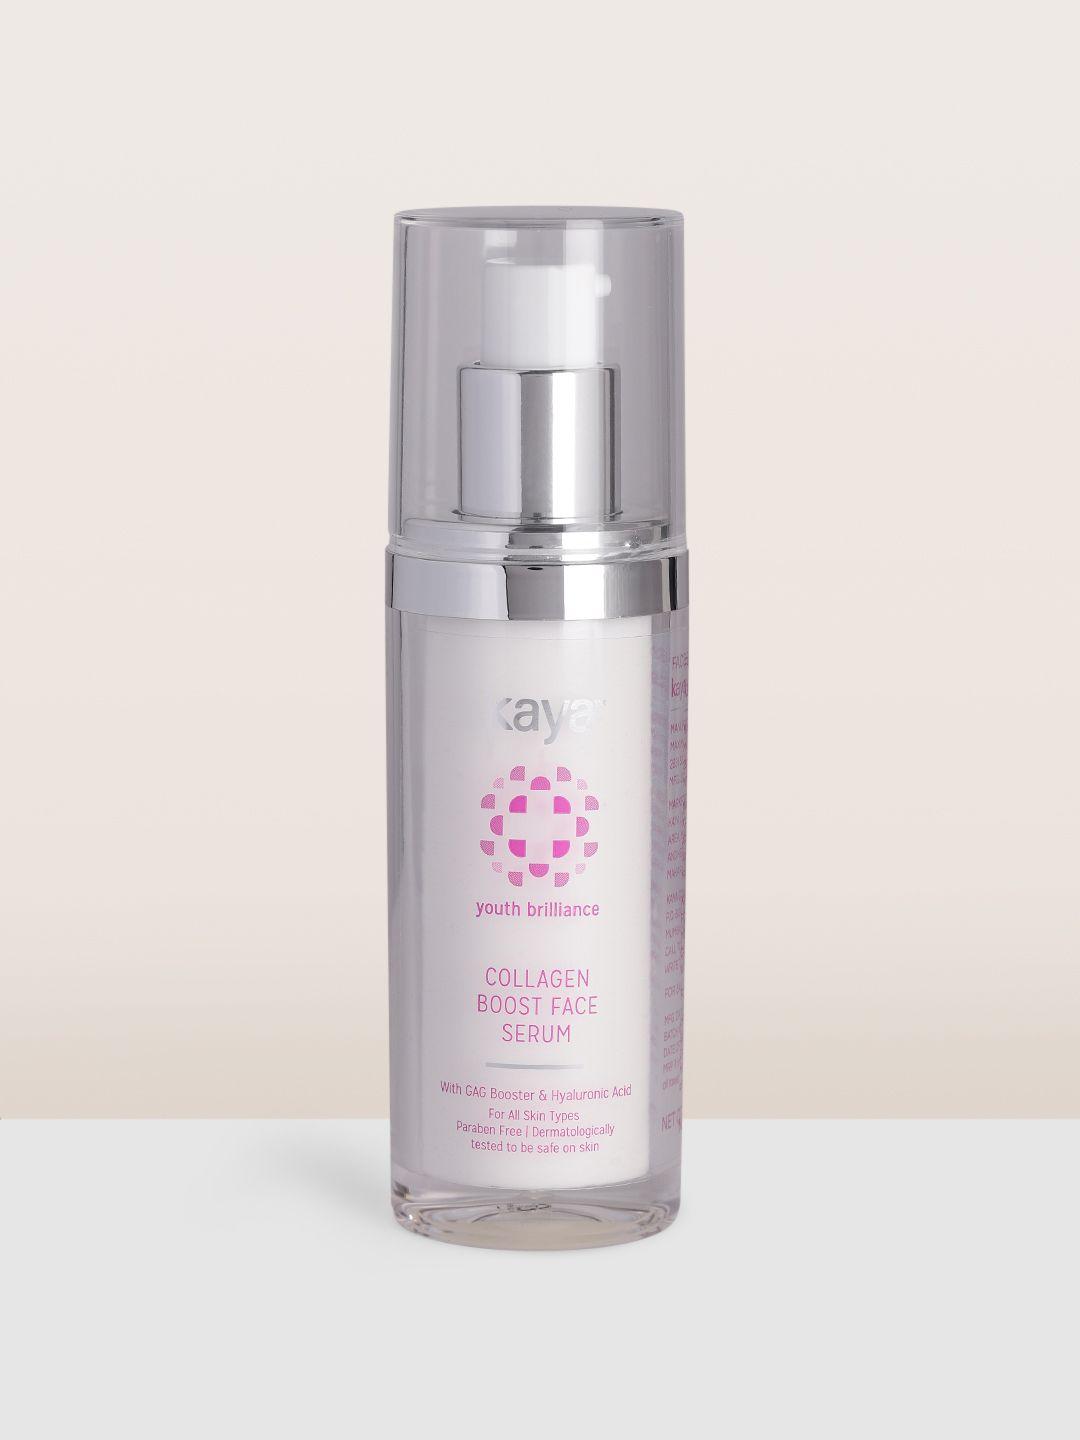 kaya youth brilliance collagen boost face serum with gag booster & hyaluronic acid - 30 ml